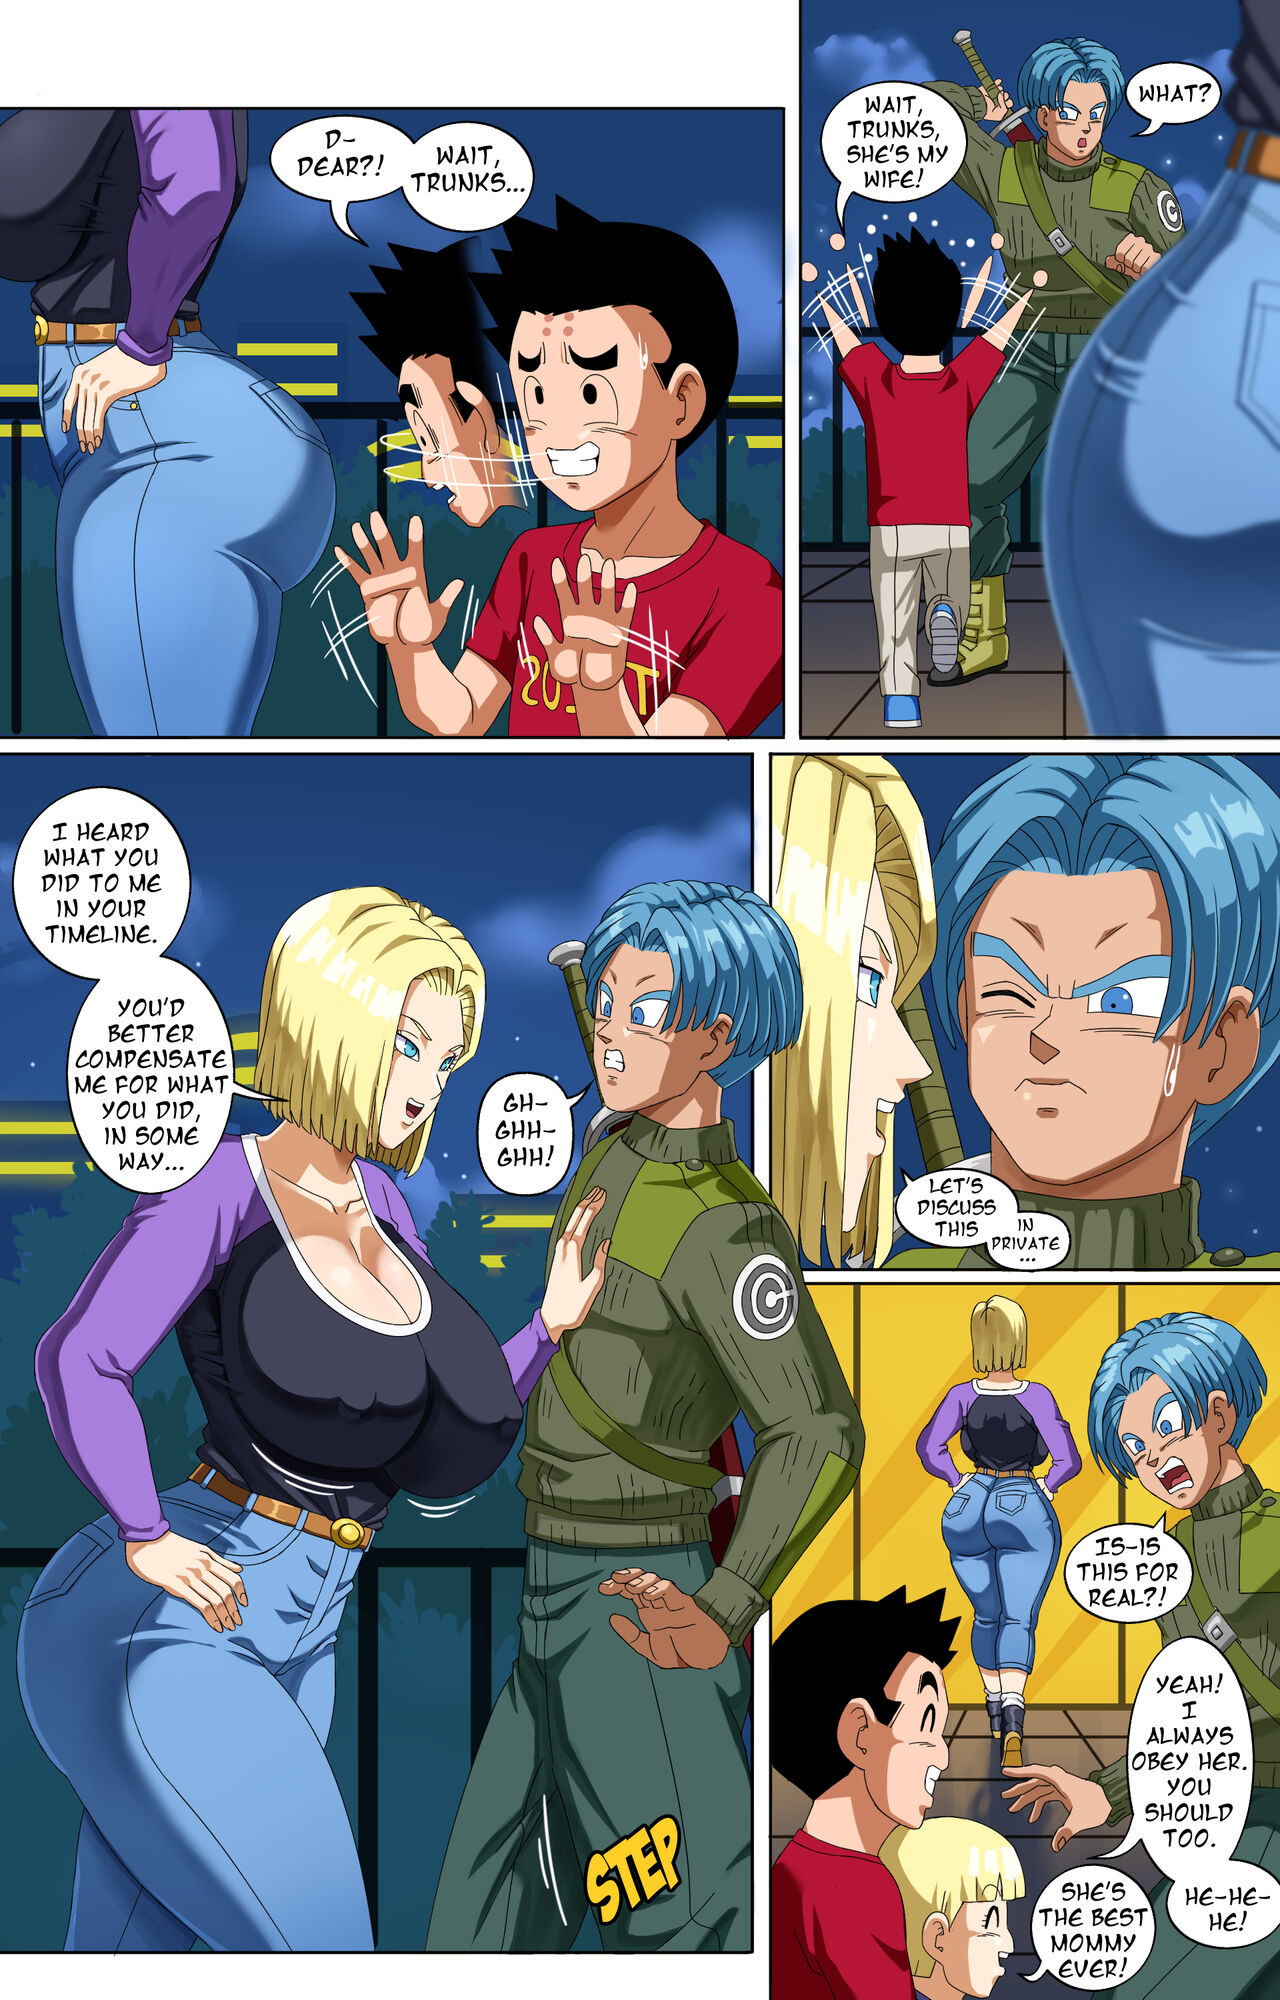 Pink Pawg - Meeting Android 18 Yet Again (Dragon Ball Super) â€¢ Free Porn  Comics